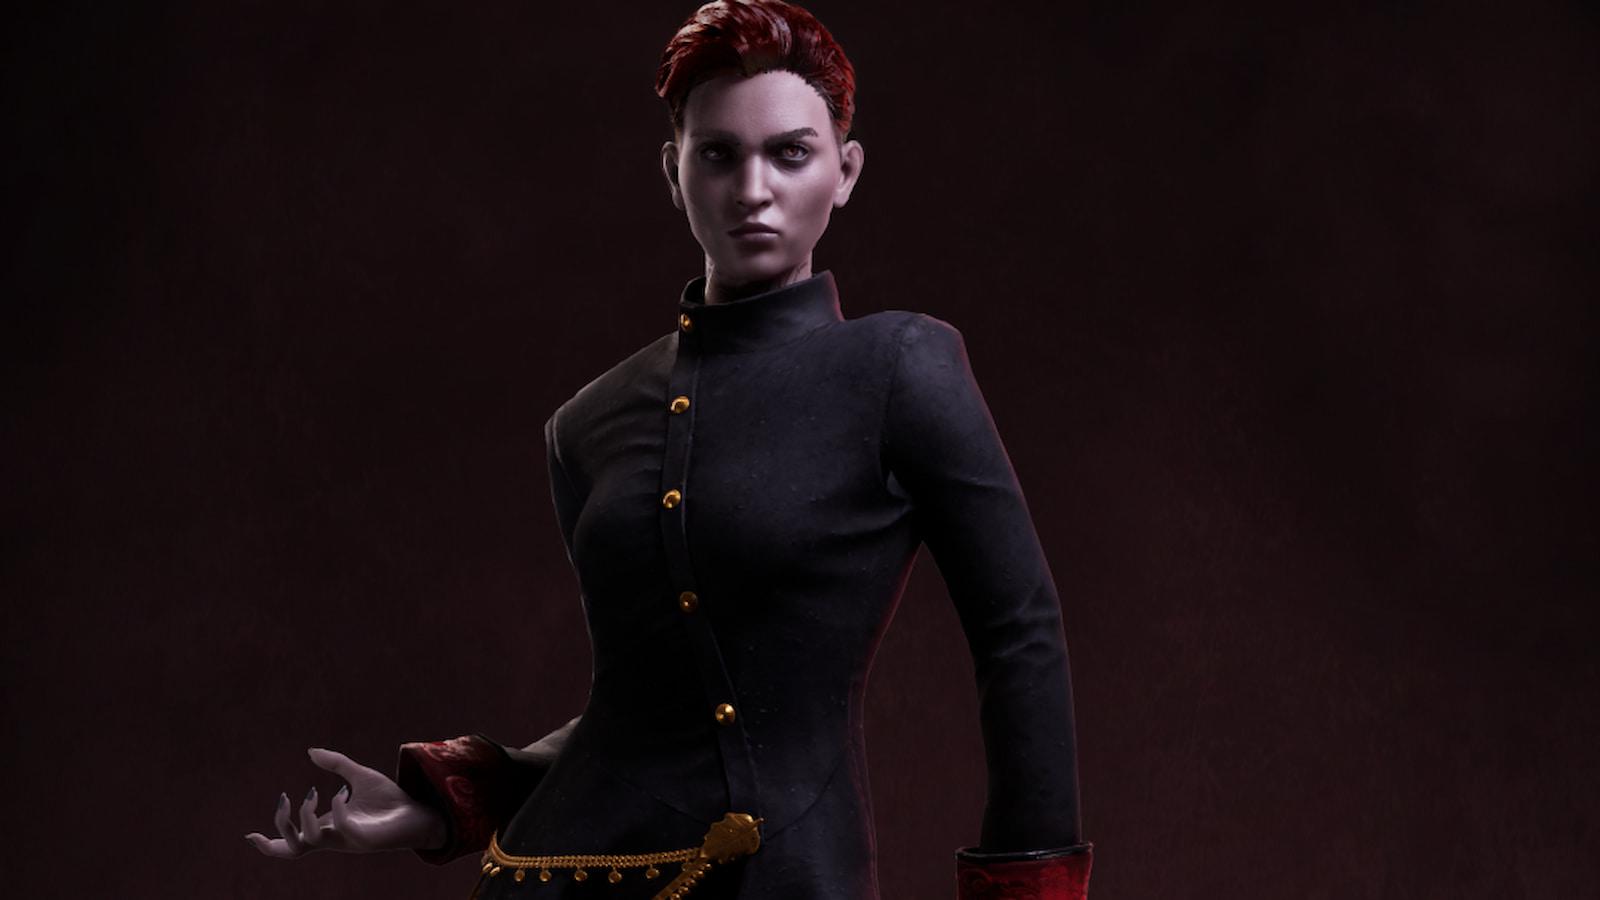 Phyre Tremere form in Vampire: The Masqeurade Bloodlines 2